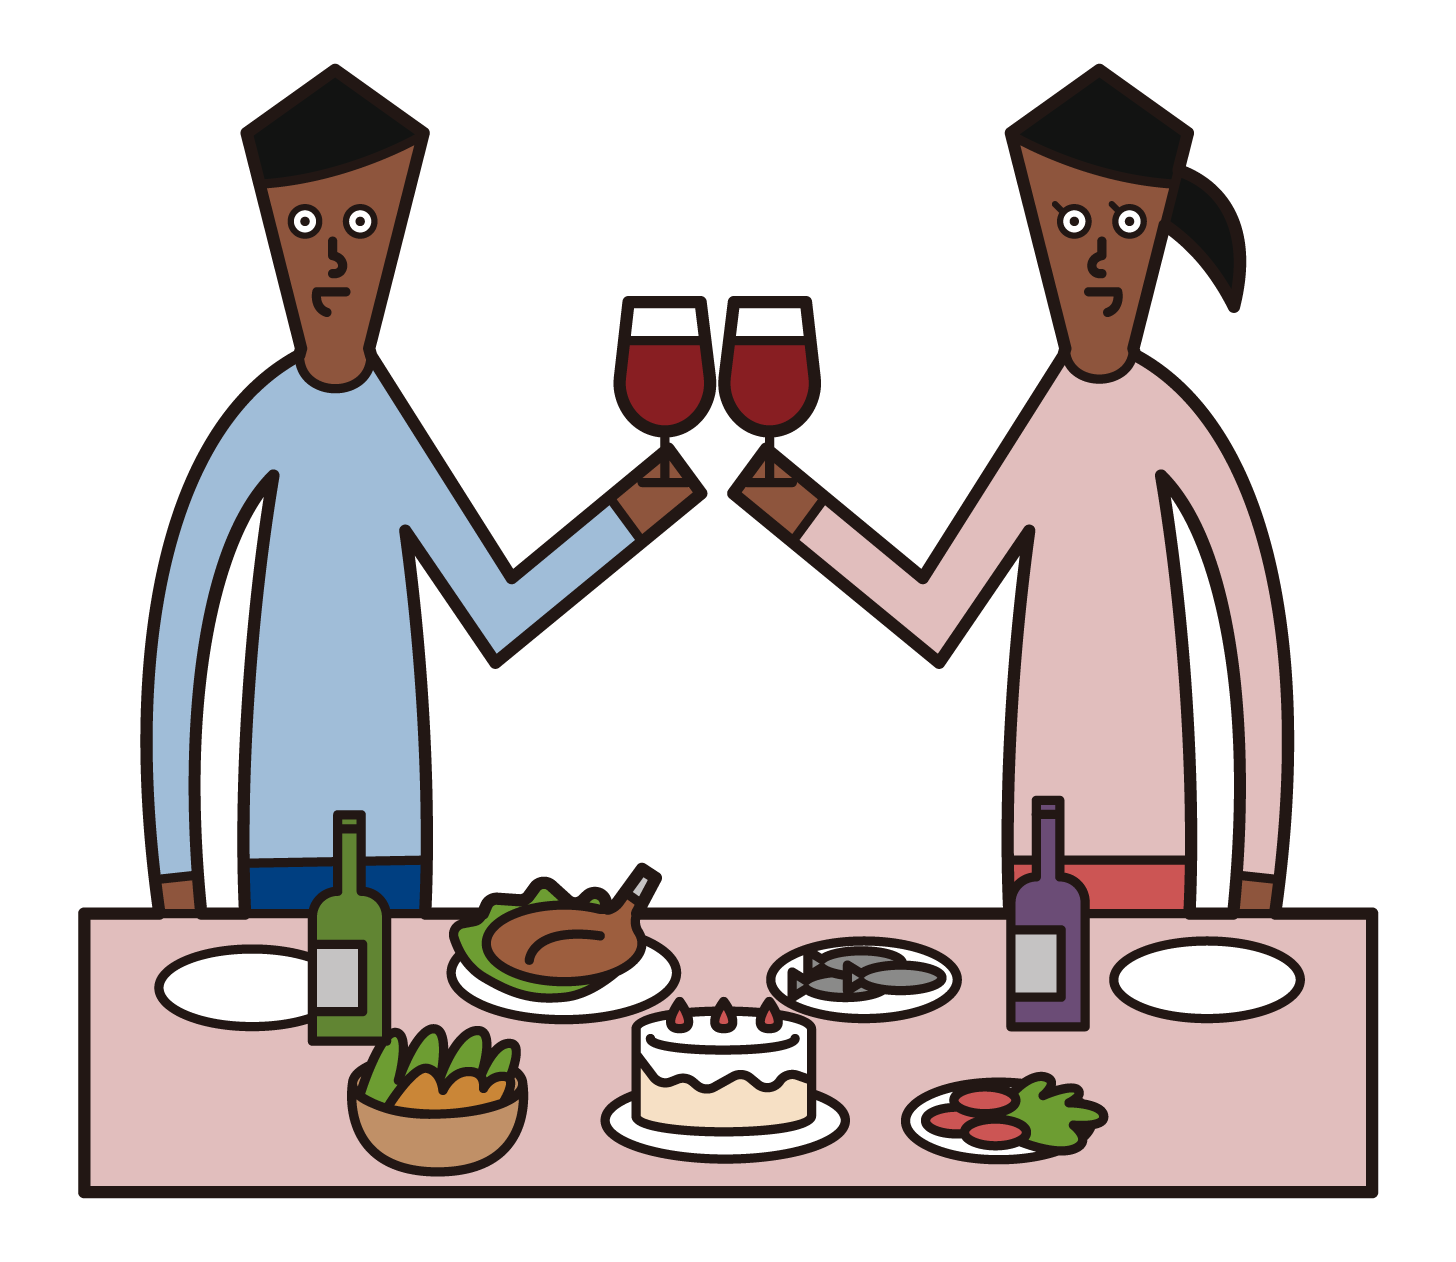 Illustrations of people (men and women) toasting